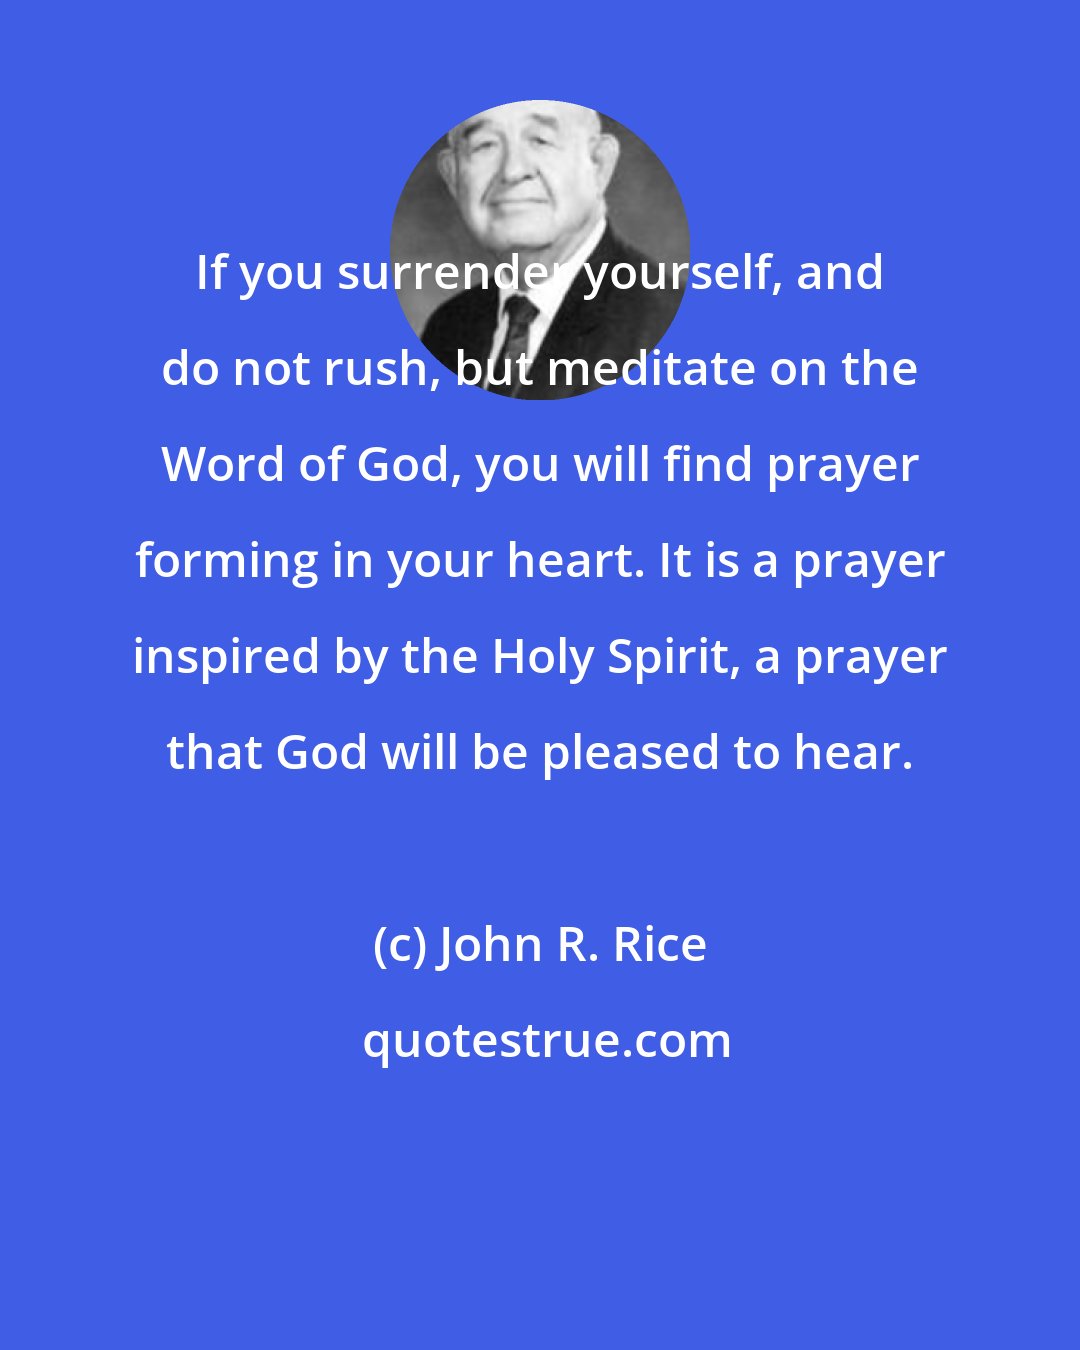 John R. Rice: If you surrender yourself, and do not rush, but meditate on the Word of God, you will find prayer forming in your heart. It is a prayer inspired by the Holy Spirit, a prayer that God will be pleased to hear.